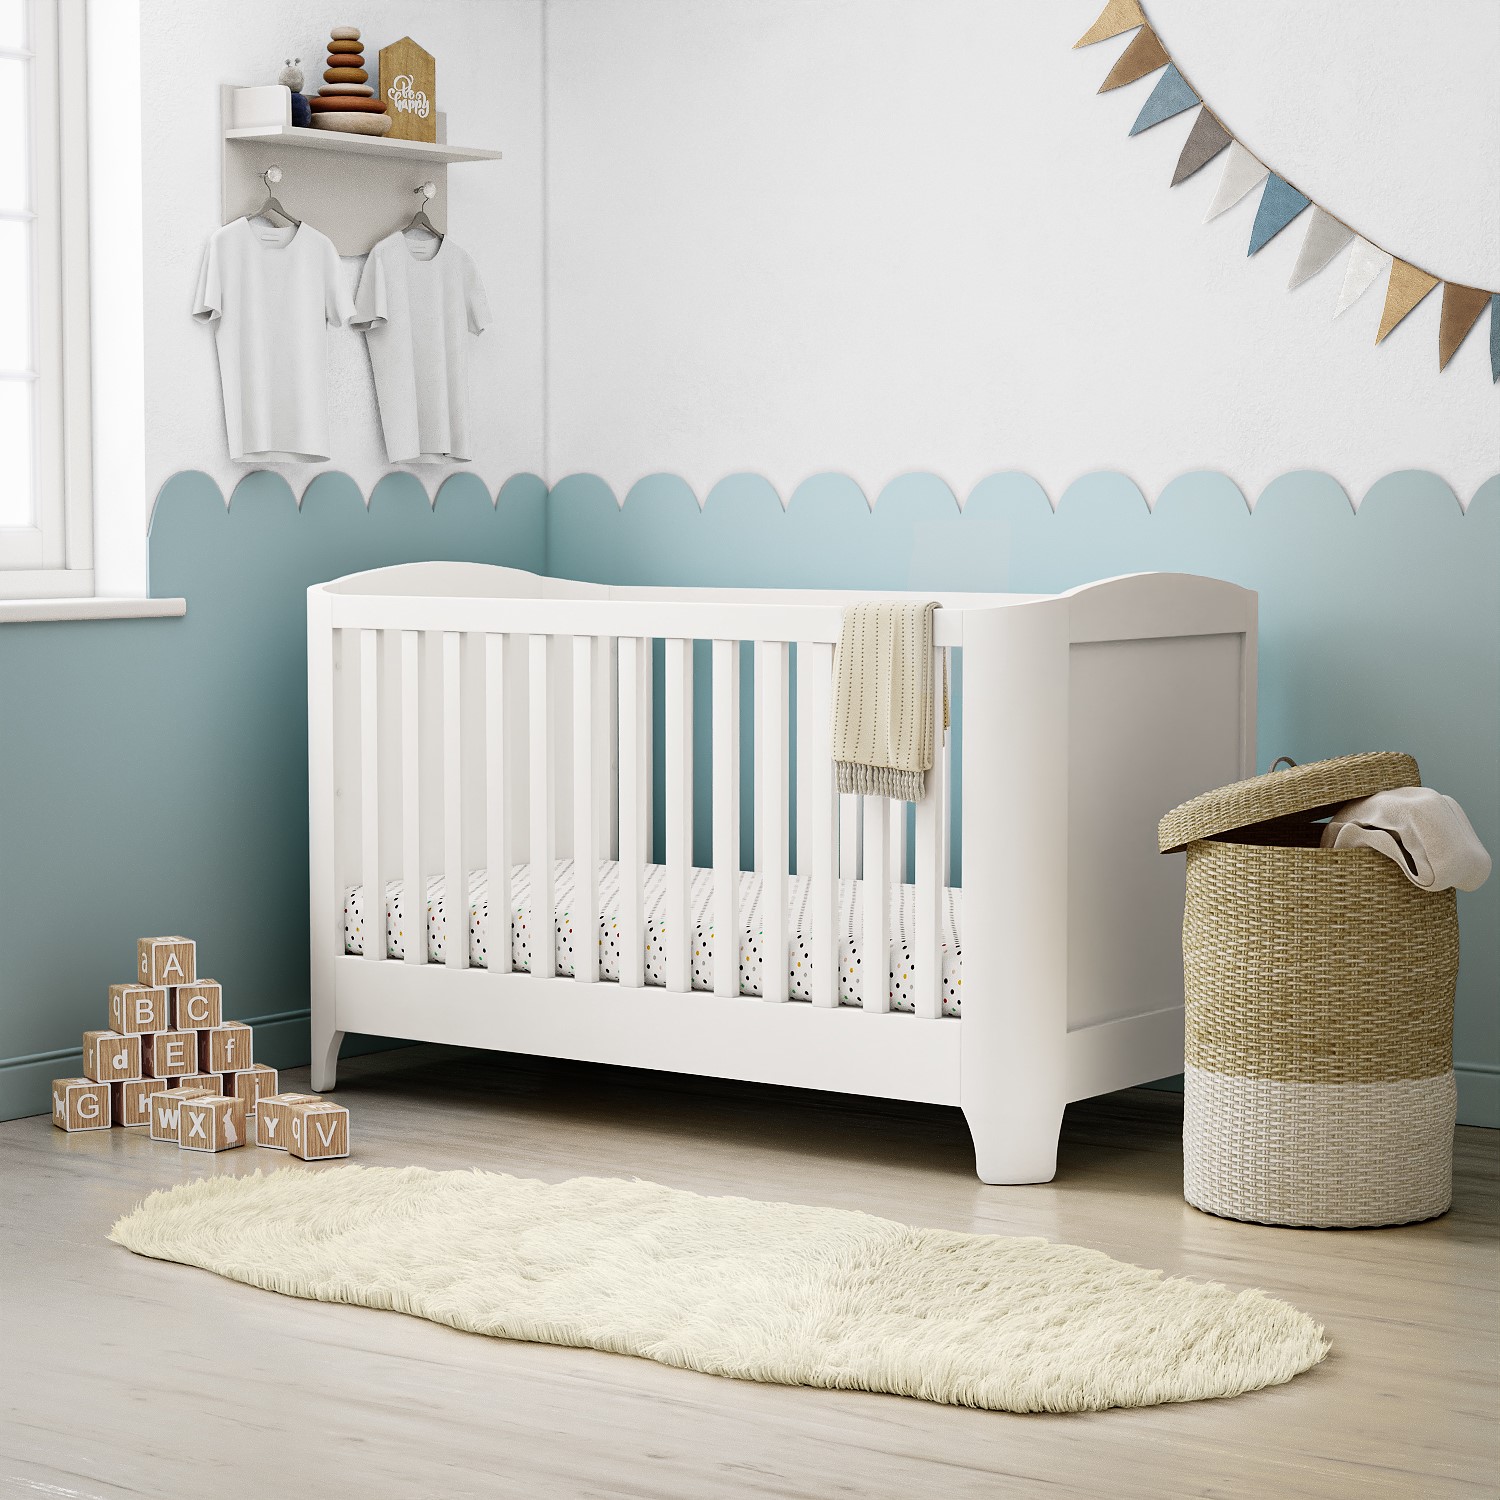 Read more about White pine nursery furniture 2-piece set with curved edges including cot bed and changing table shiloh